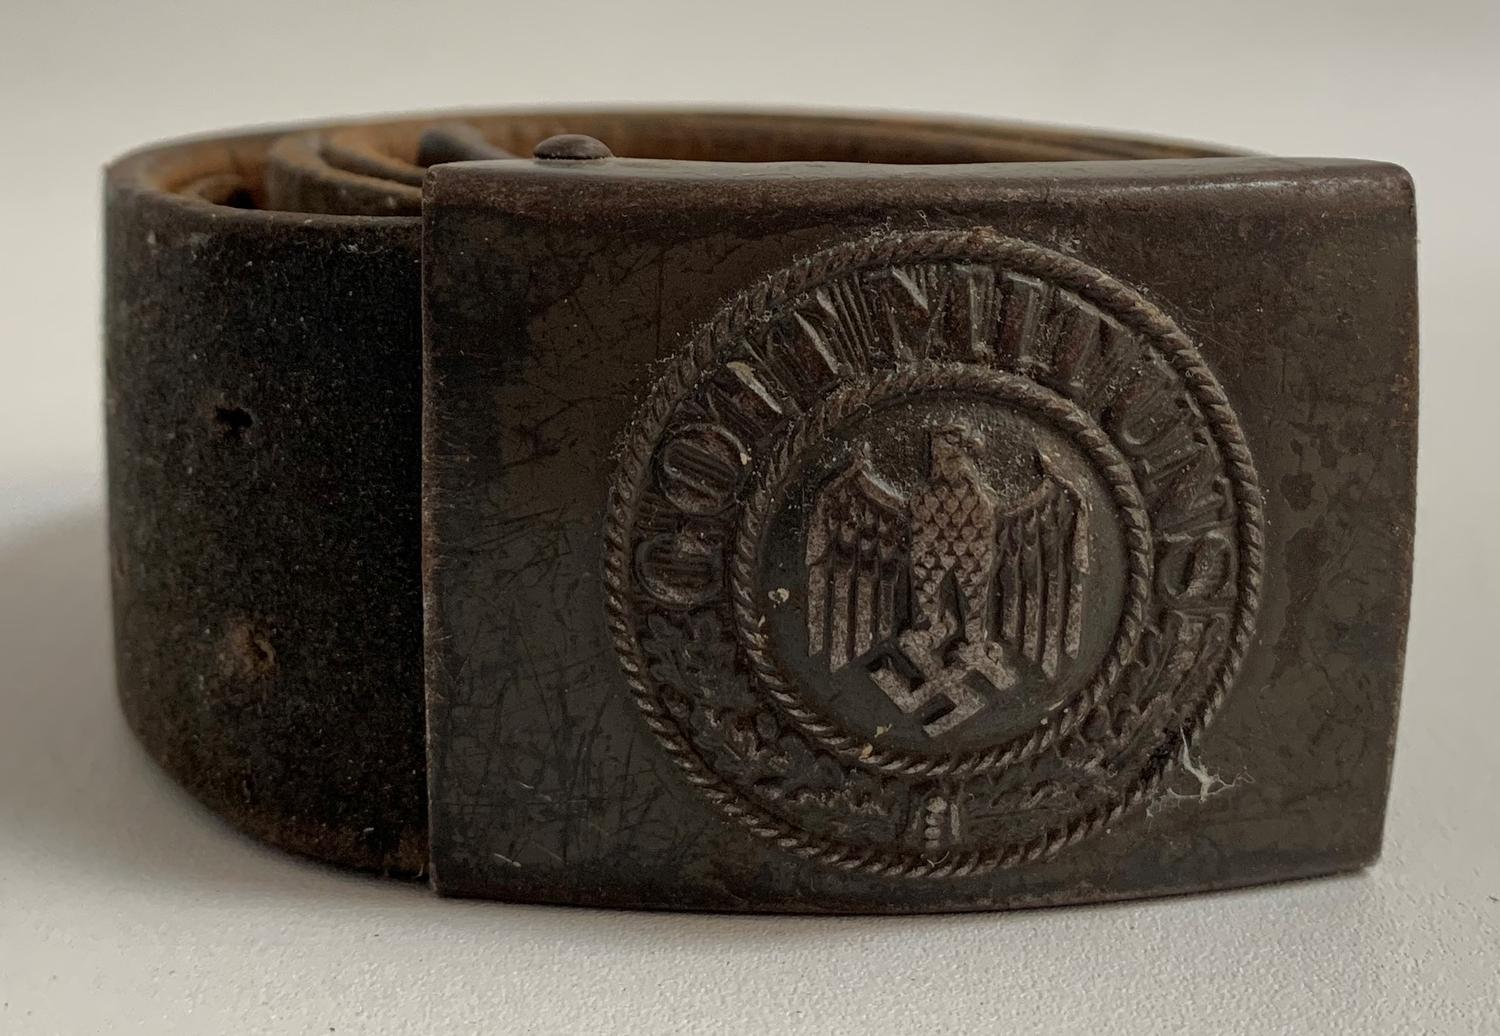 WWII GERMAN NAZI BELT the metal buckle marked Gott Mit Uns above the German eagle and swastika, on a